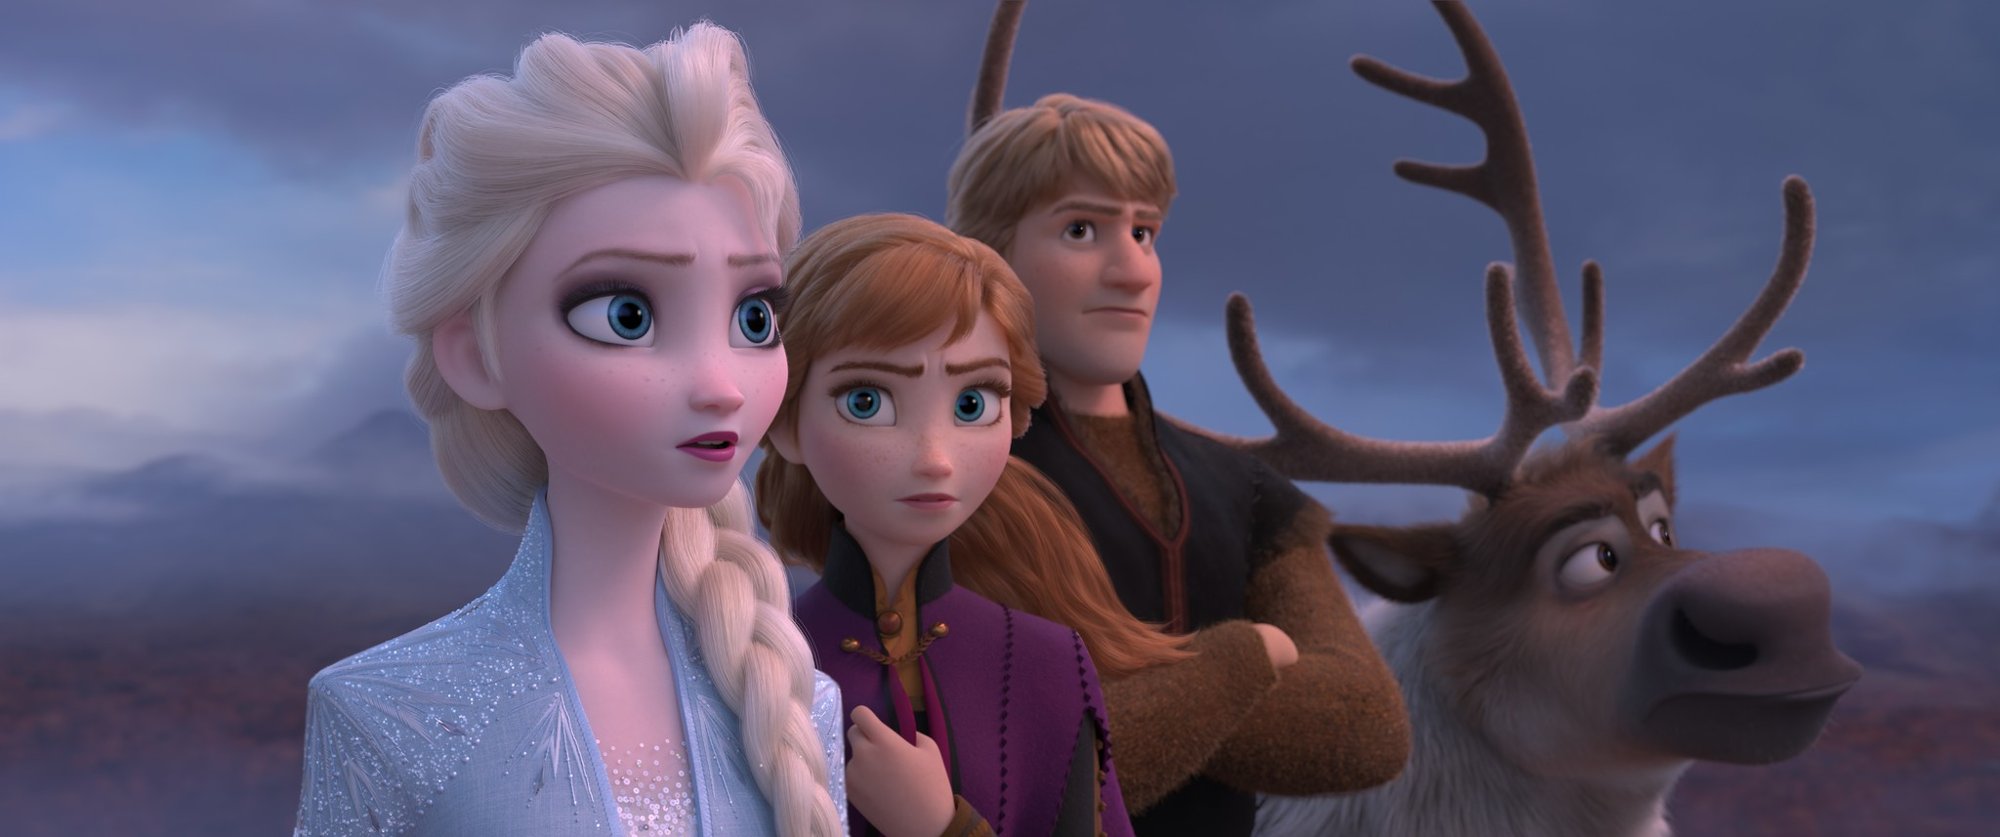 Elsa, Anna and Kristoff and Sven from Walt Disney Pictures' Frozen II (2019)